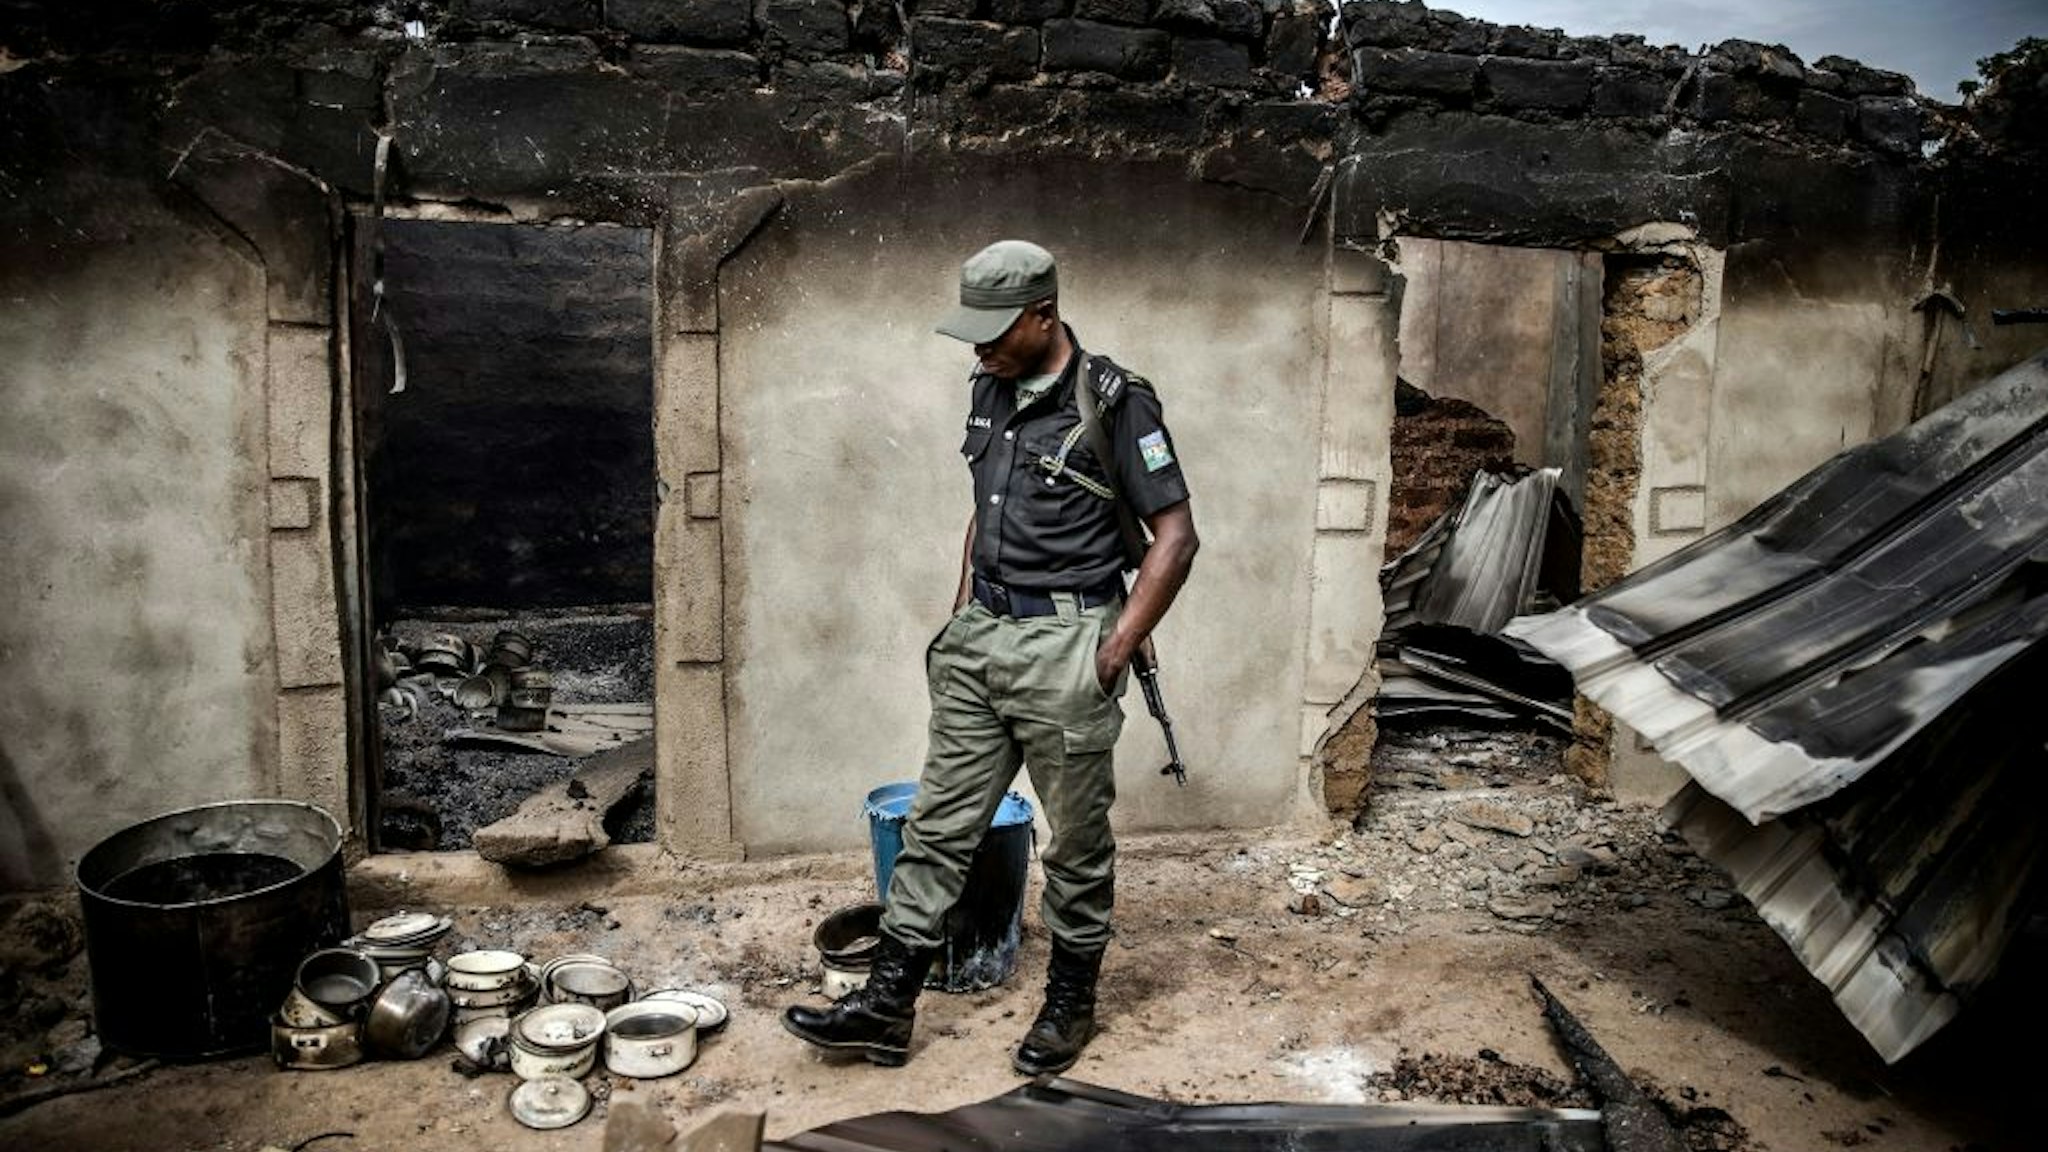 A Nigerian Police Officer patrols an area of destroyed and burned houses after a recent Fulani attack in the Adara farmers' village of Angwan Aku, Kaduna State, Nigeria on April 14, 2019. - The ongoing strife between Muslim herders and Christian farmers, which claimed nearly 2,000 lives in 2018 and displaced hundreds of thousands of others, is a divisive issue for Nigeria and some other countries in West Africa. (Photo by Luis TATO / AFP)